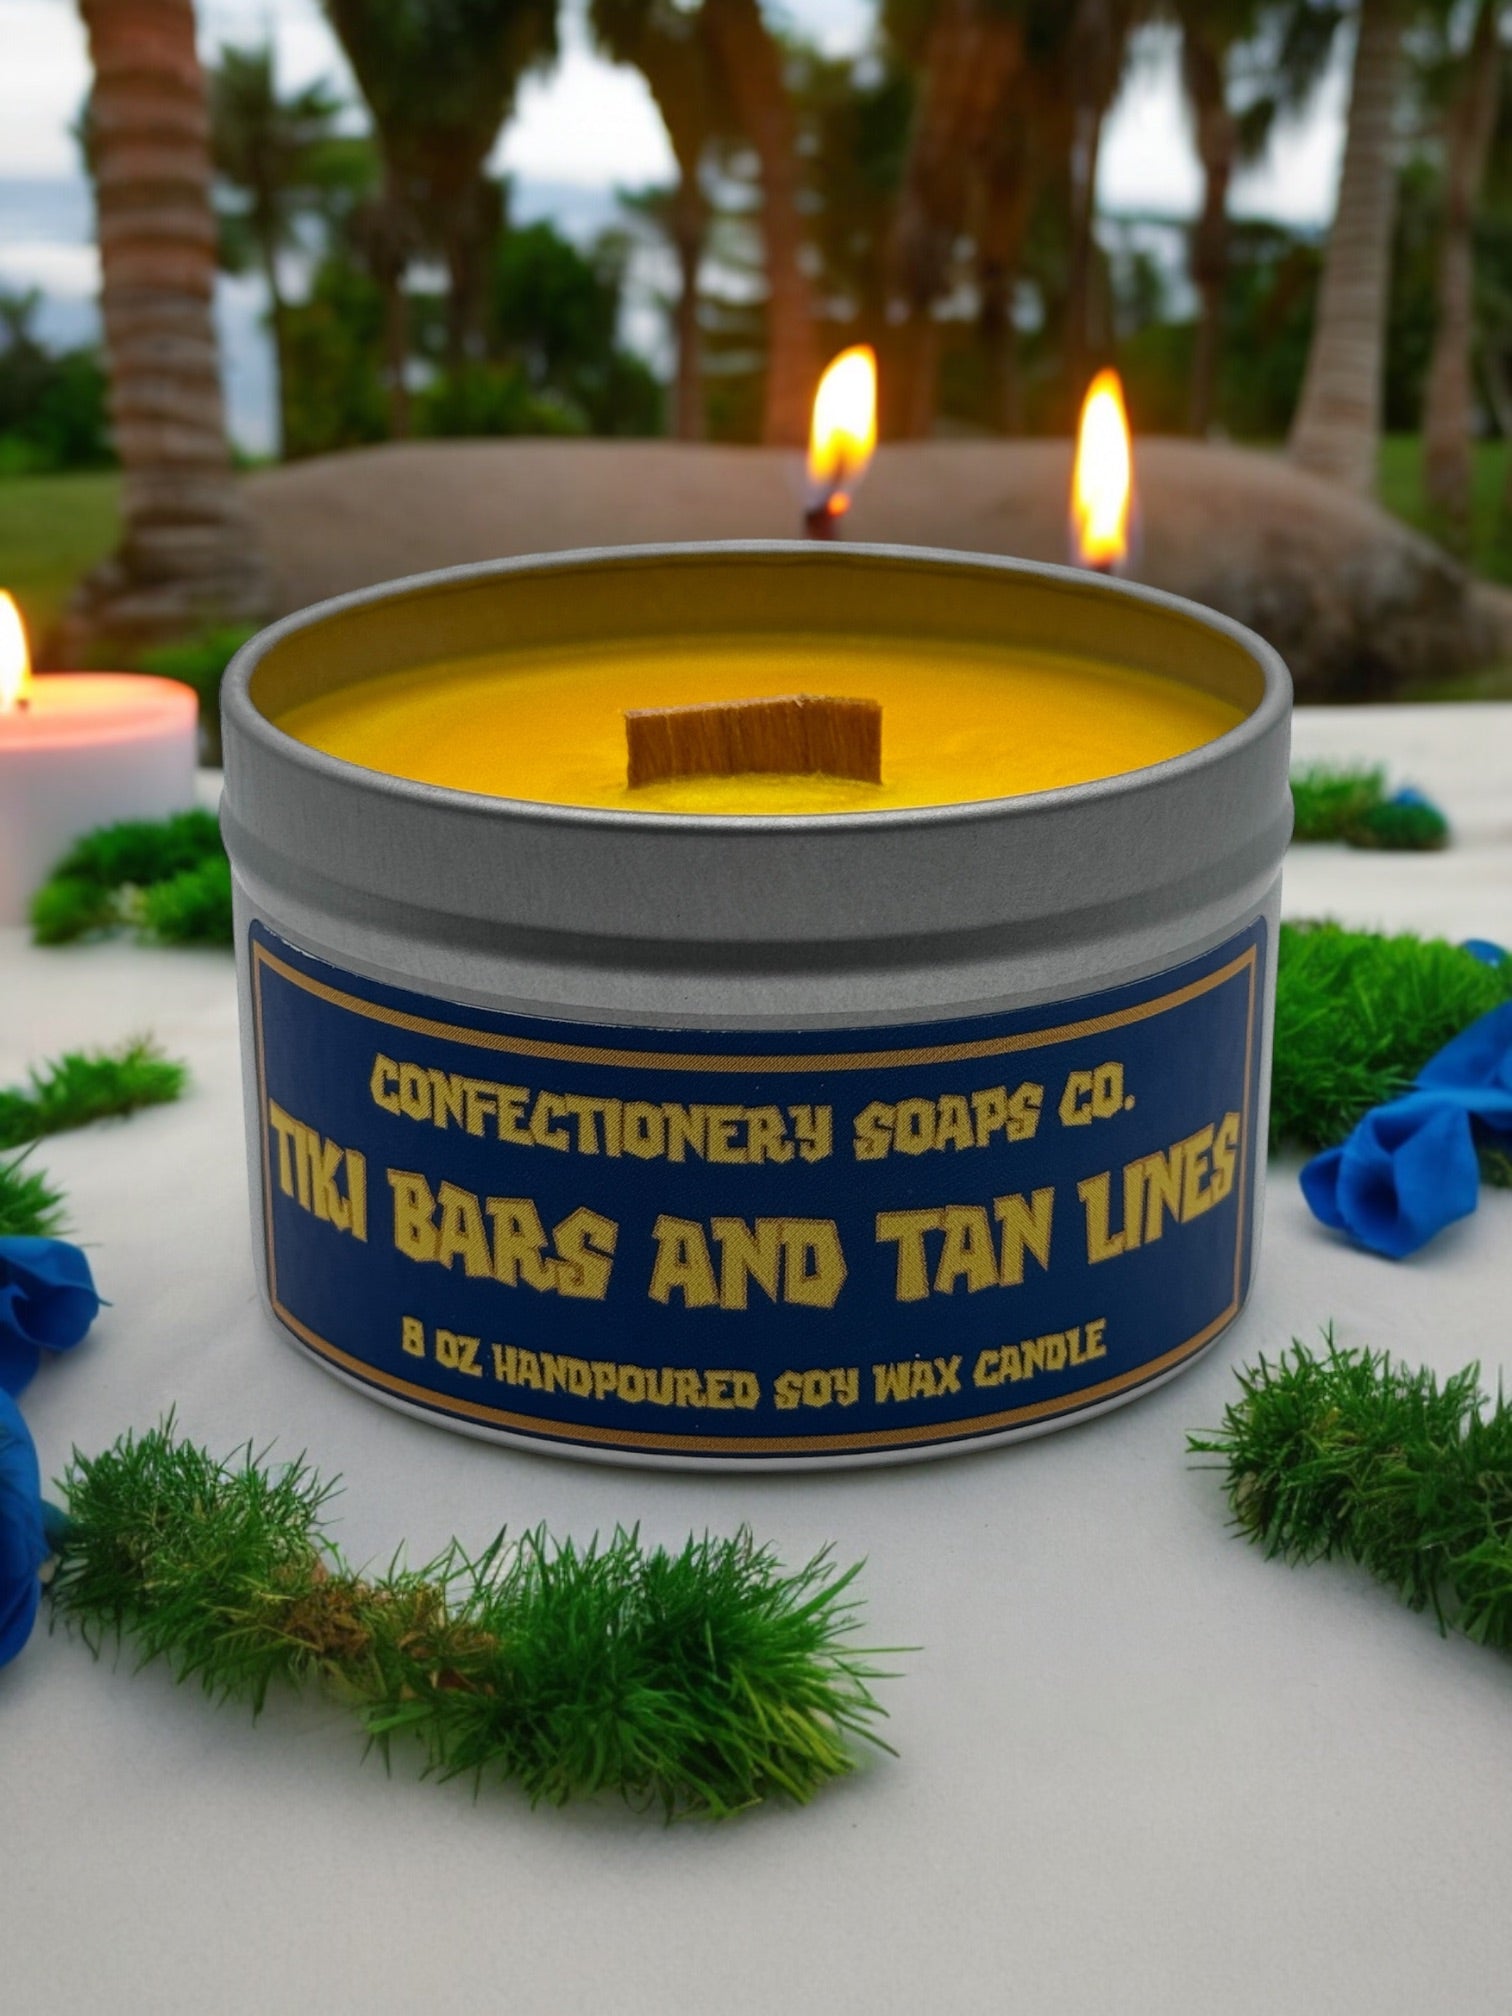 Tiki Bars and Tan Lines CSC Signature Candle